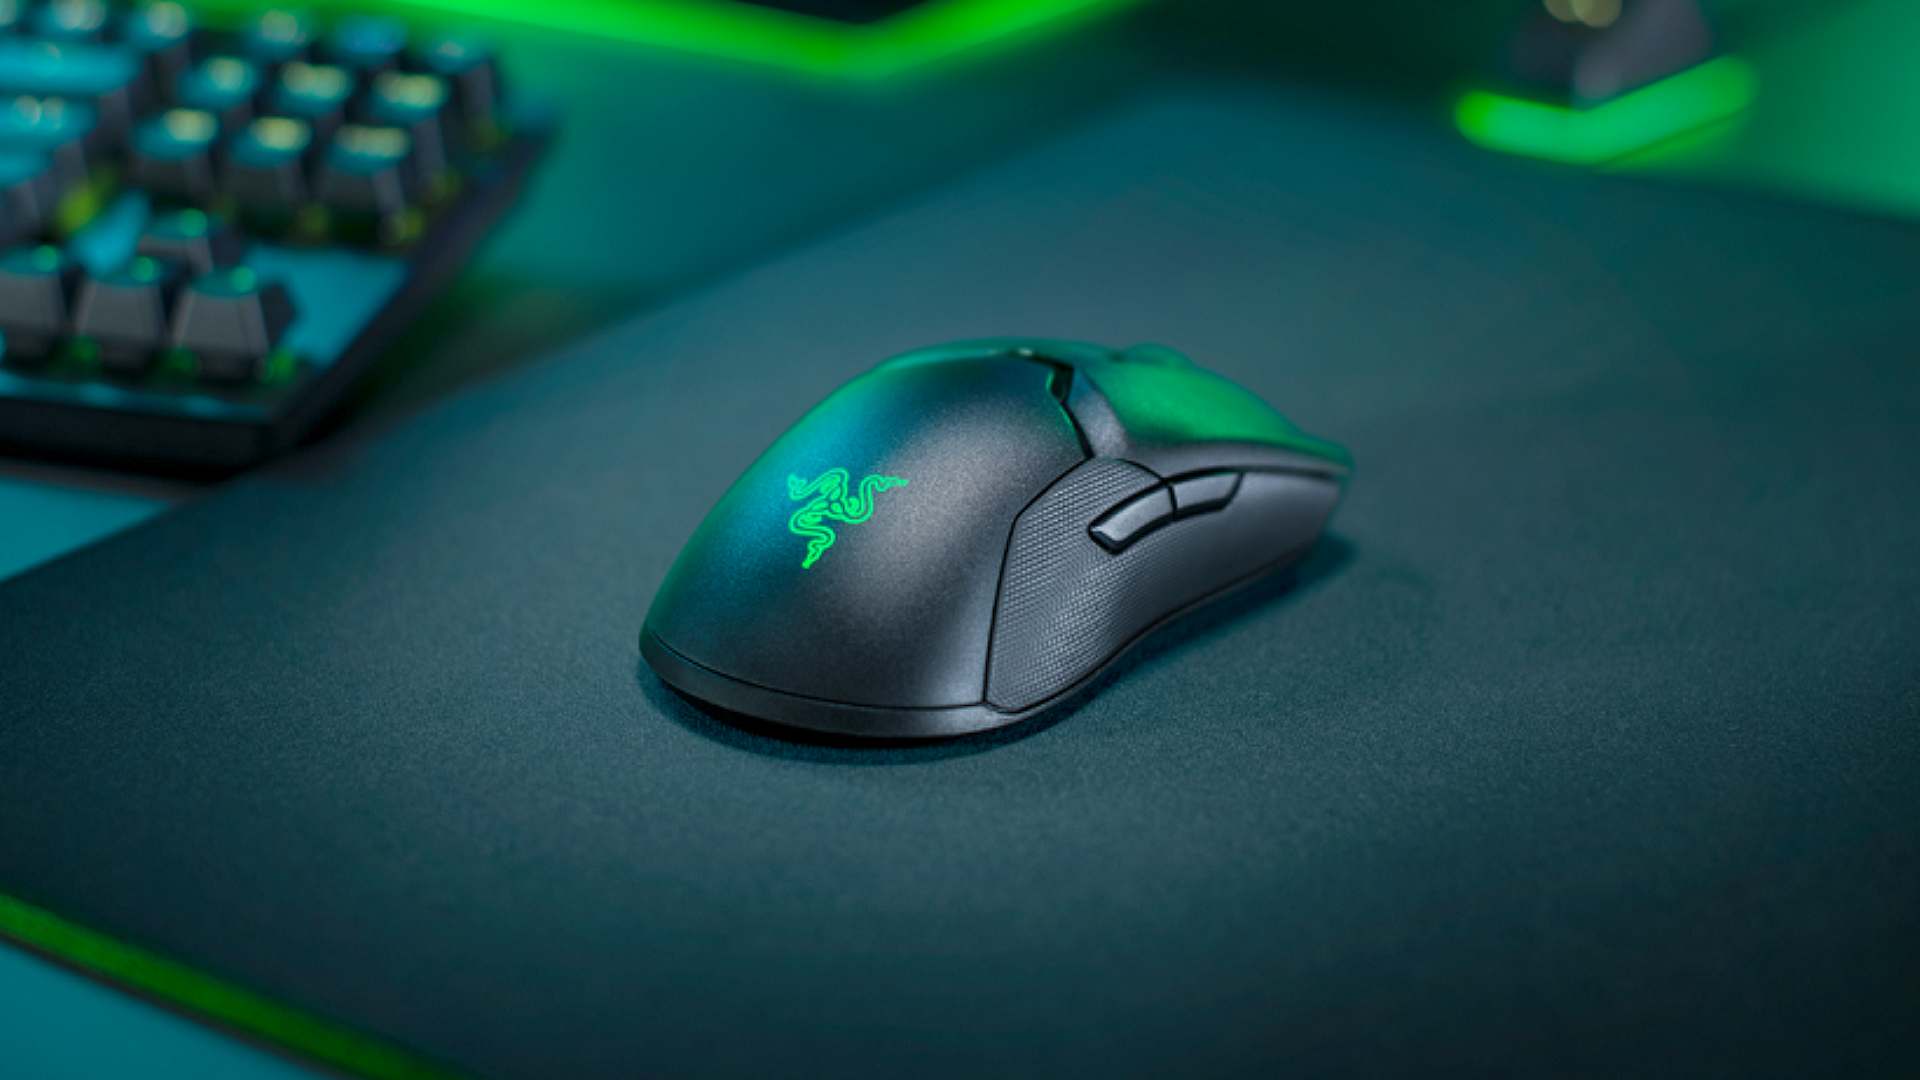 Razer's Viper Ultimate gaming mouse is now better than half price